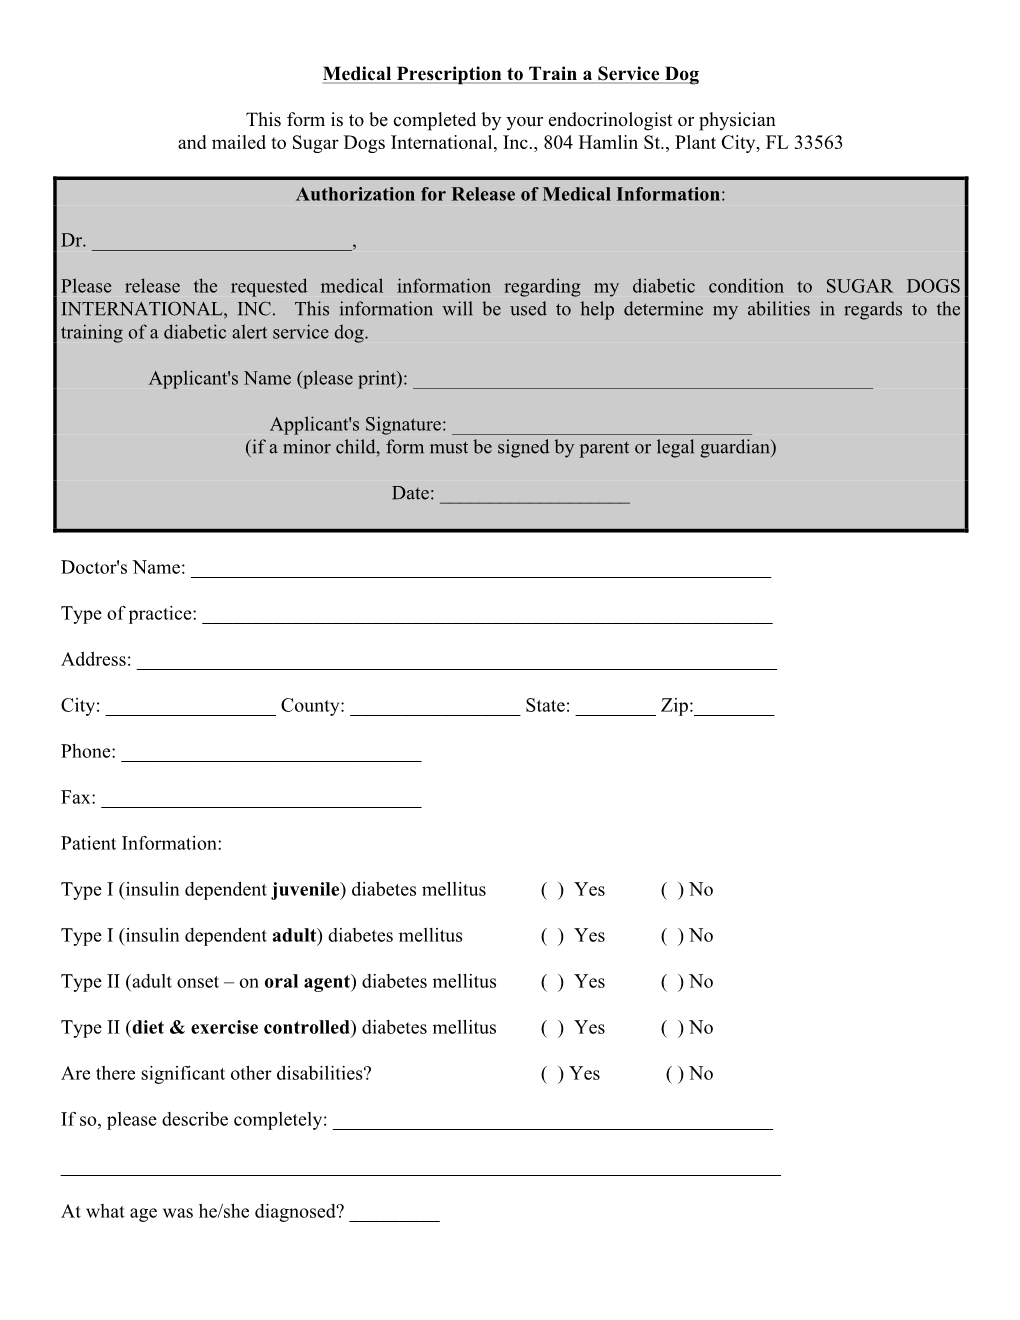 Medical Prescription to Train a Service Dog This Form Is to Be Completed by Your Endocrinologist Or Physician and Mailed to Suga